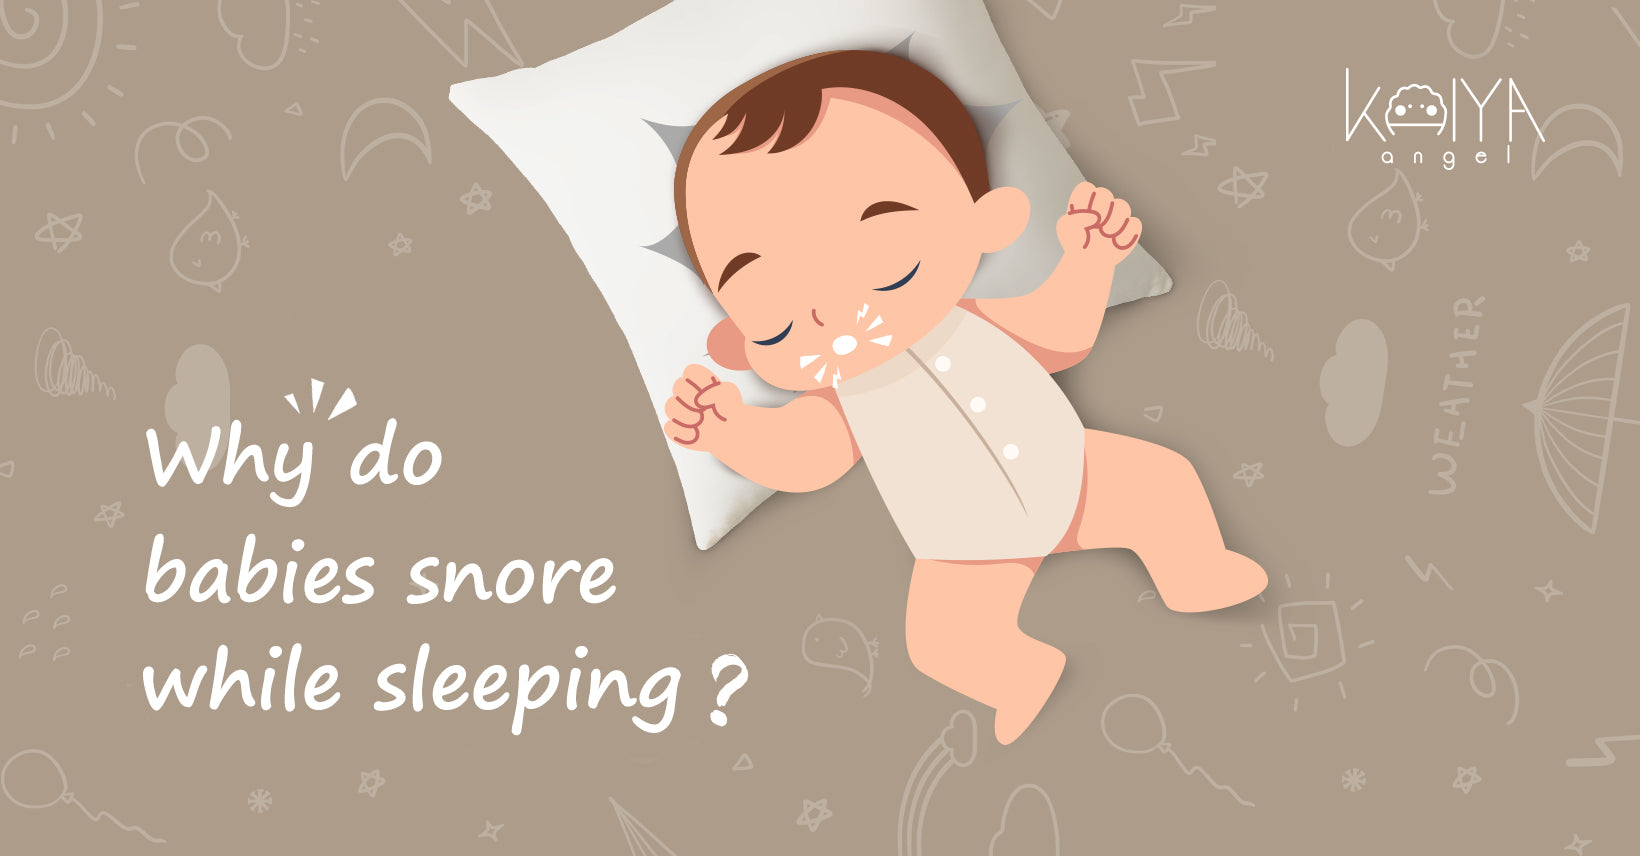 Why do babies snore while sleeping?